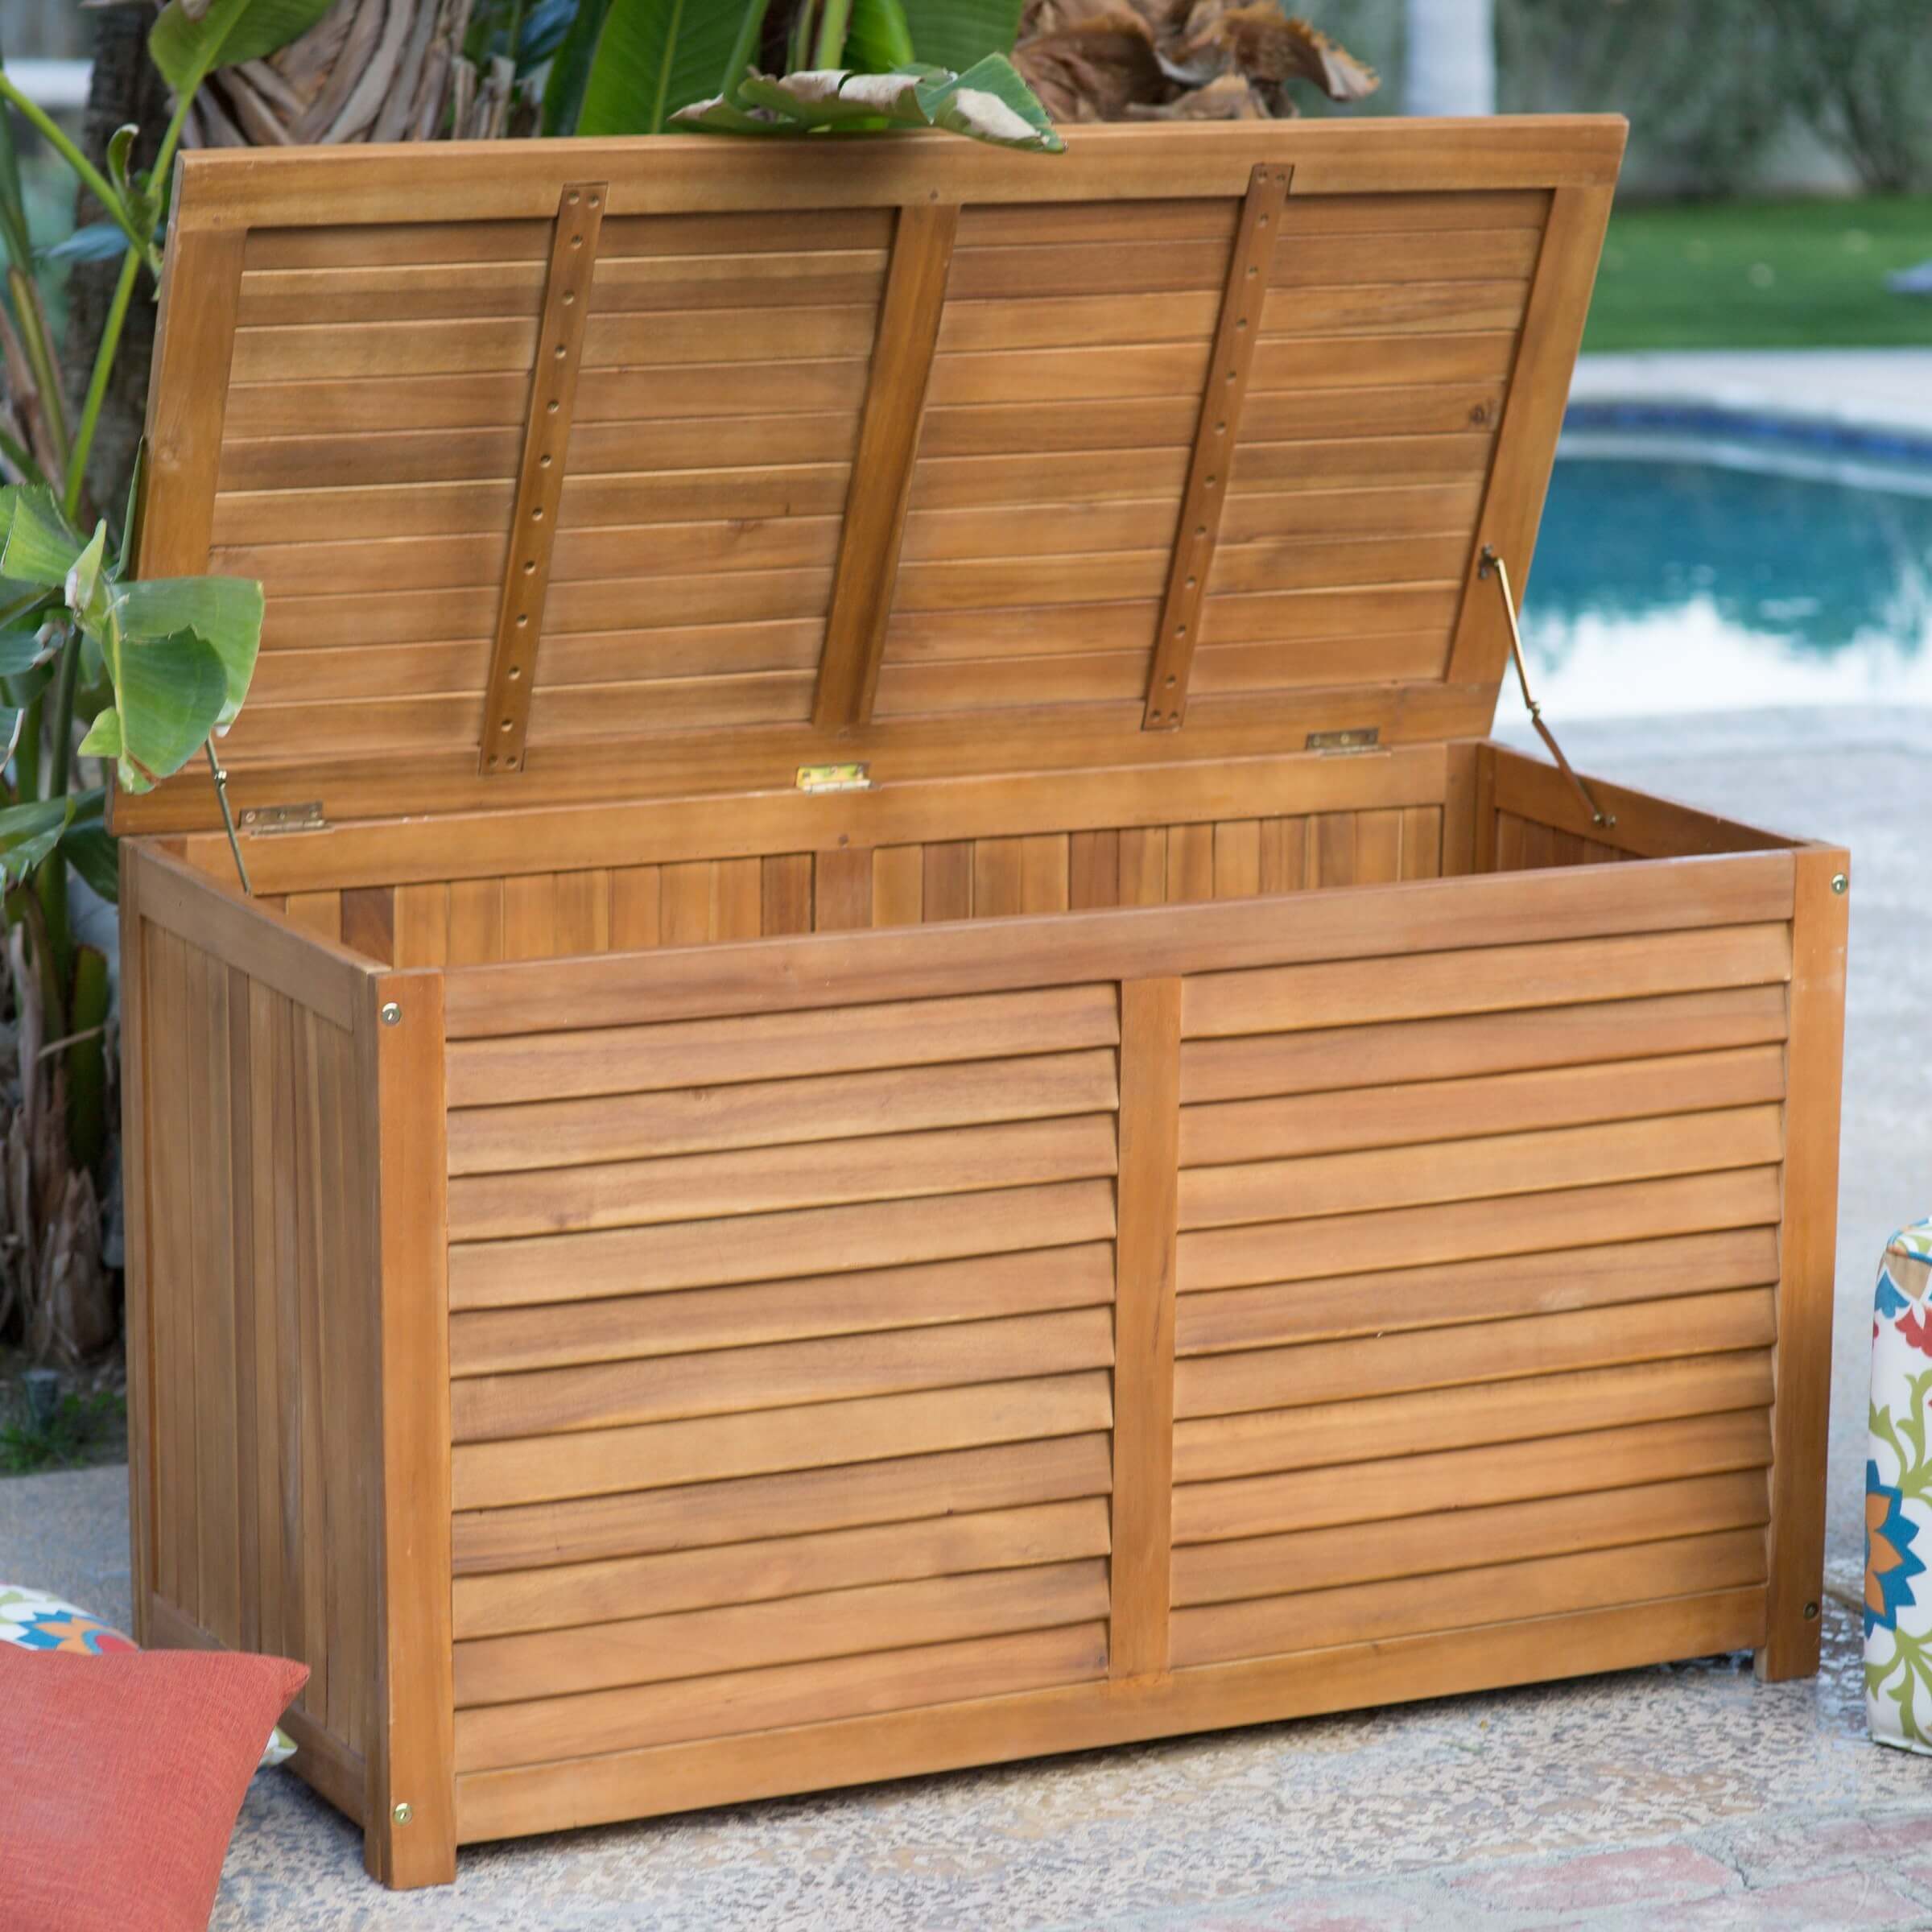 Top 10 Types of Outdoor Deck Storage Boxes